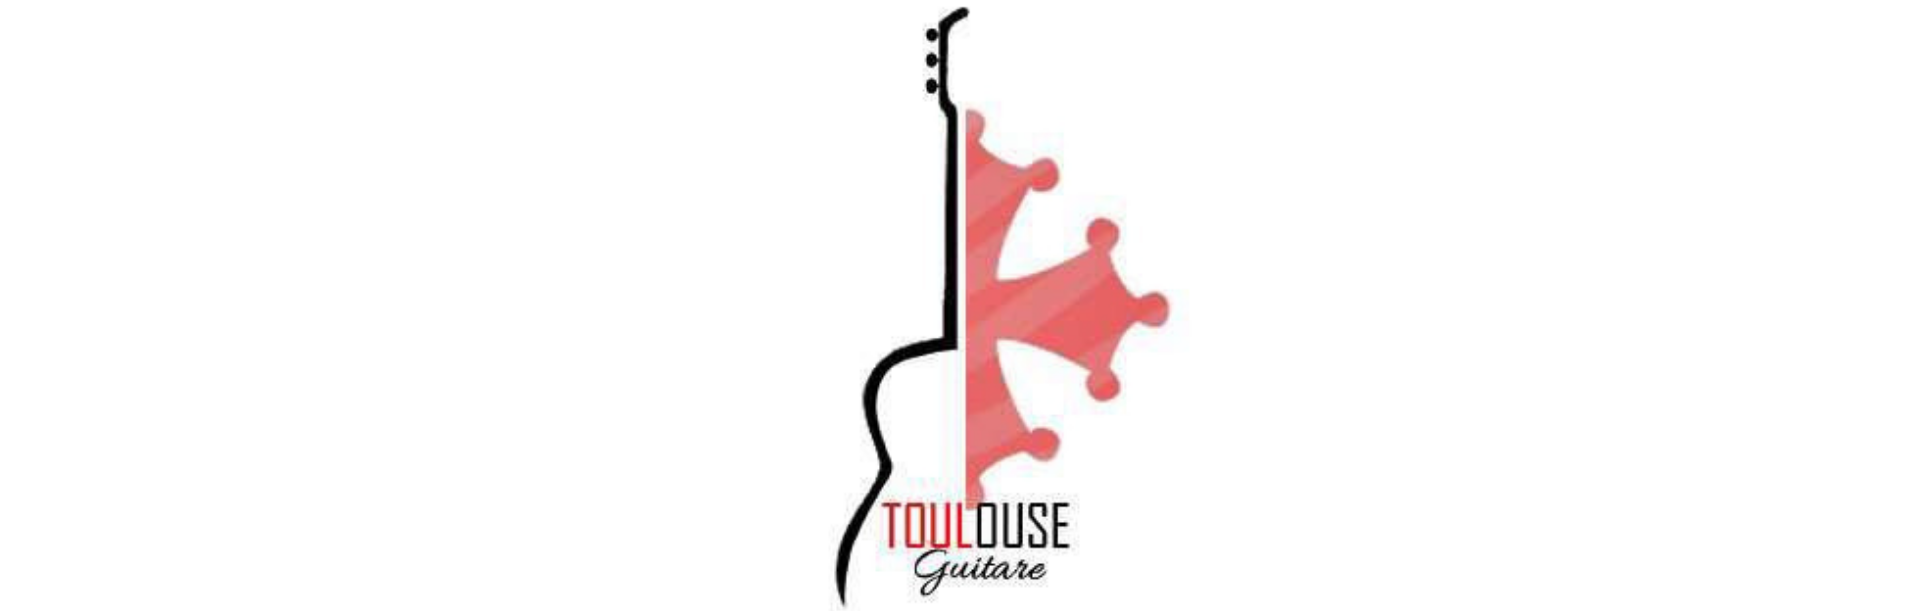 Toulouse guitare